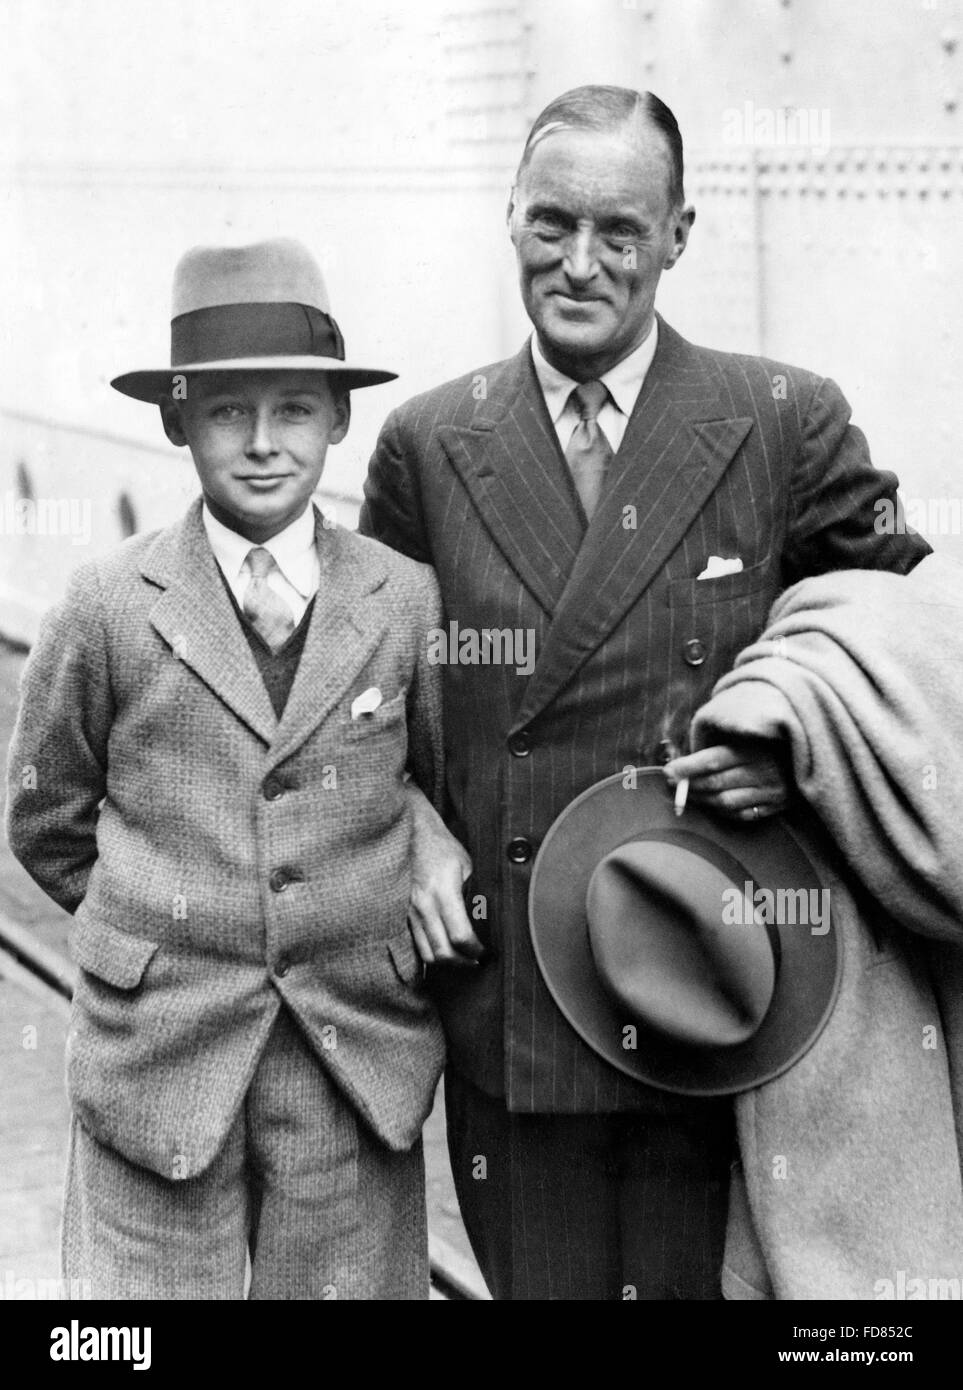 Sir Malcolm Campbell mit seinem Sohn Donald Campbell in England, 1934 Stockfoto